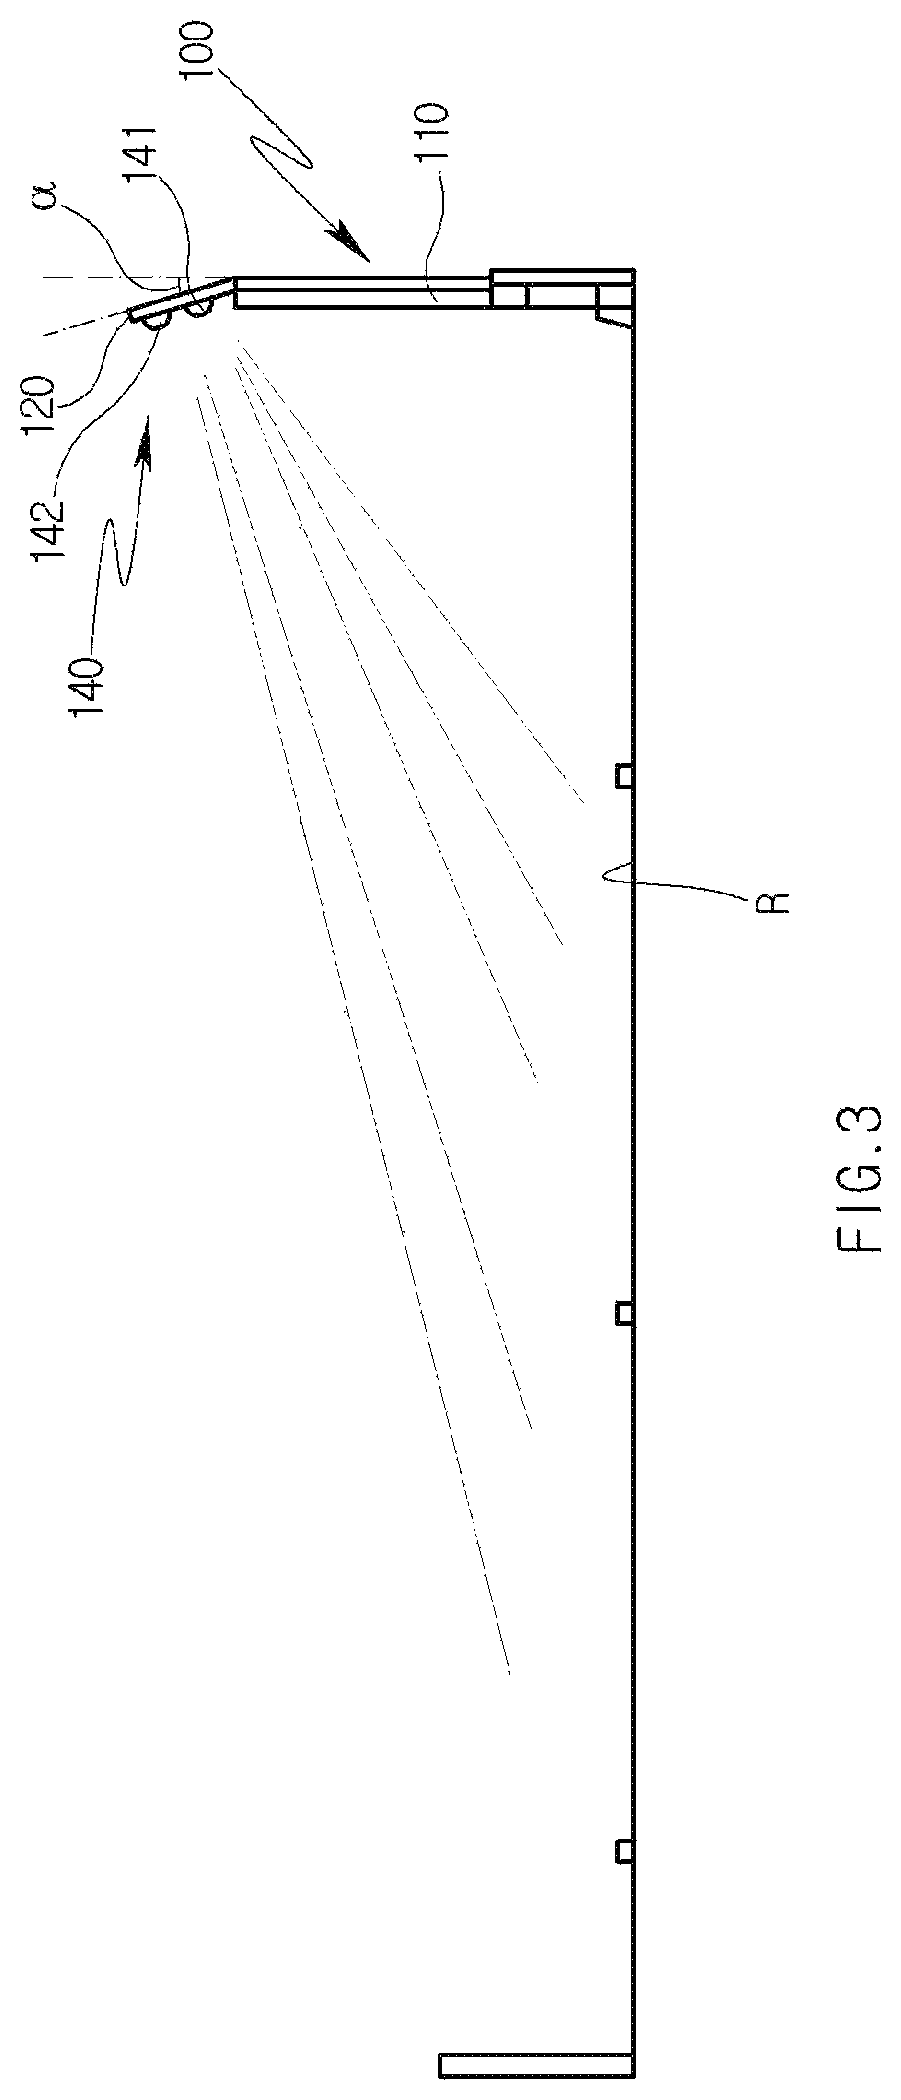 Lens cover and LED lighting device having lenses arranged at positions corresponding to LED light sources